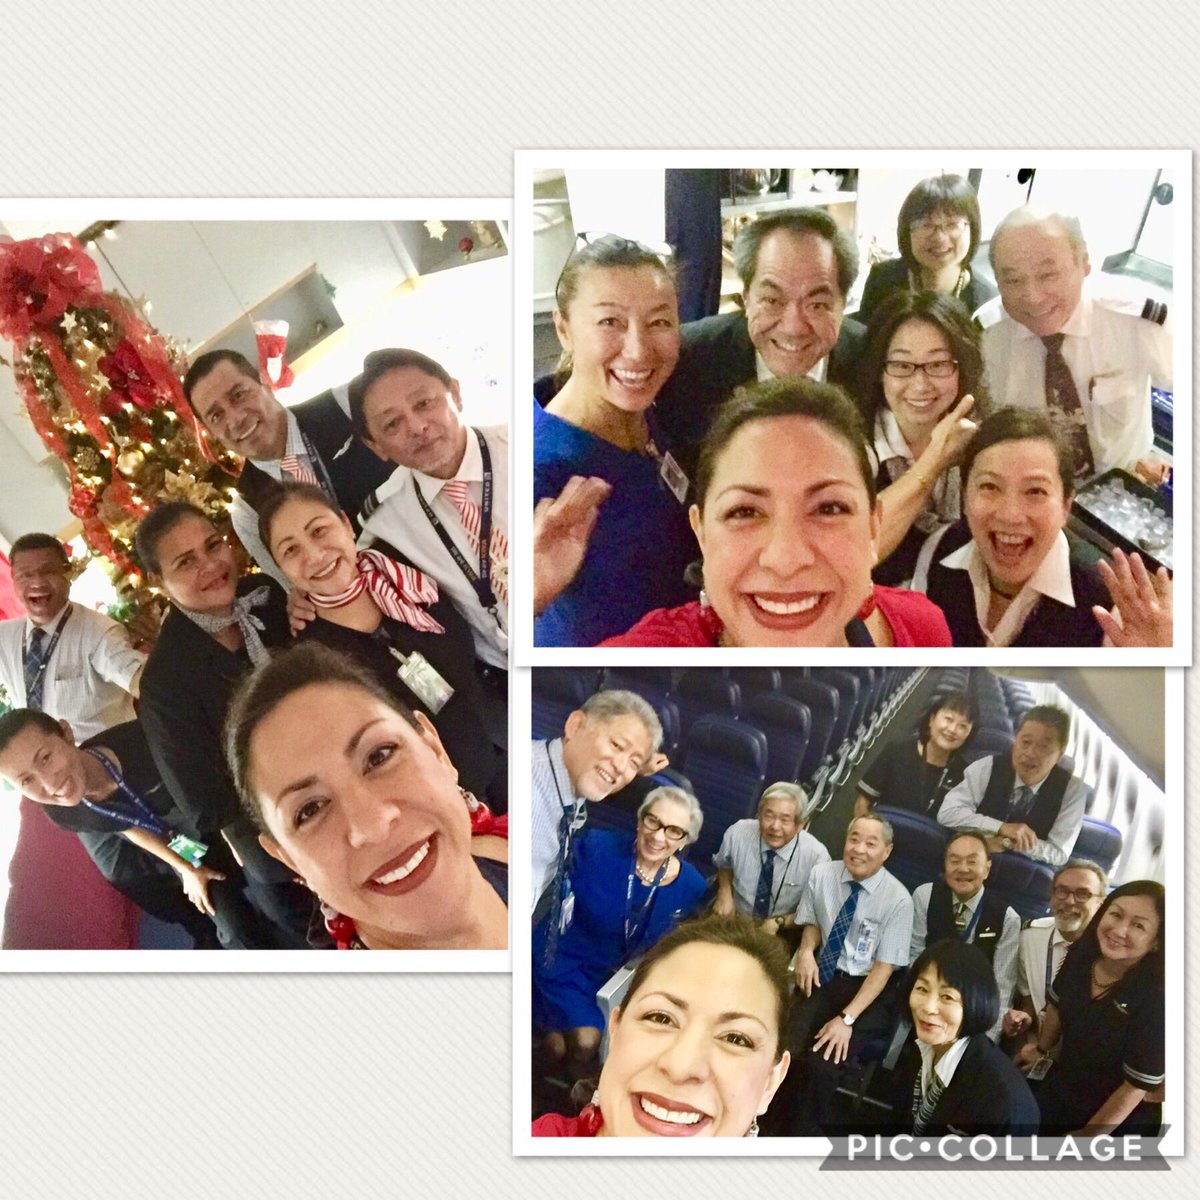 Holiday spirit in full swing Christmas morning at UAIFSbaseGUM and with our UAIFSbaseNRT and UAIFSbaseHNL partners! 🎄#beingunited